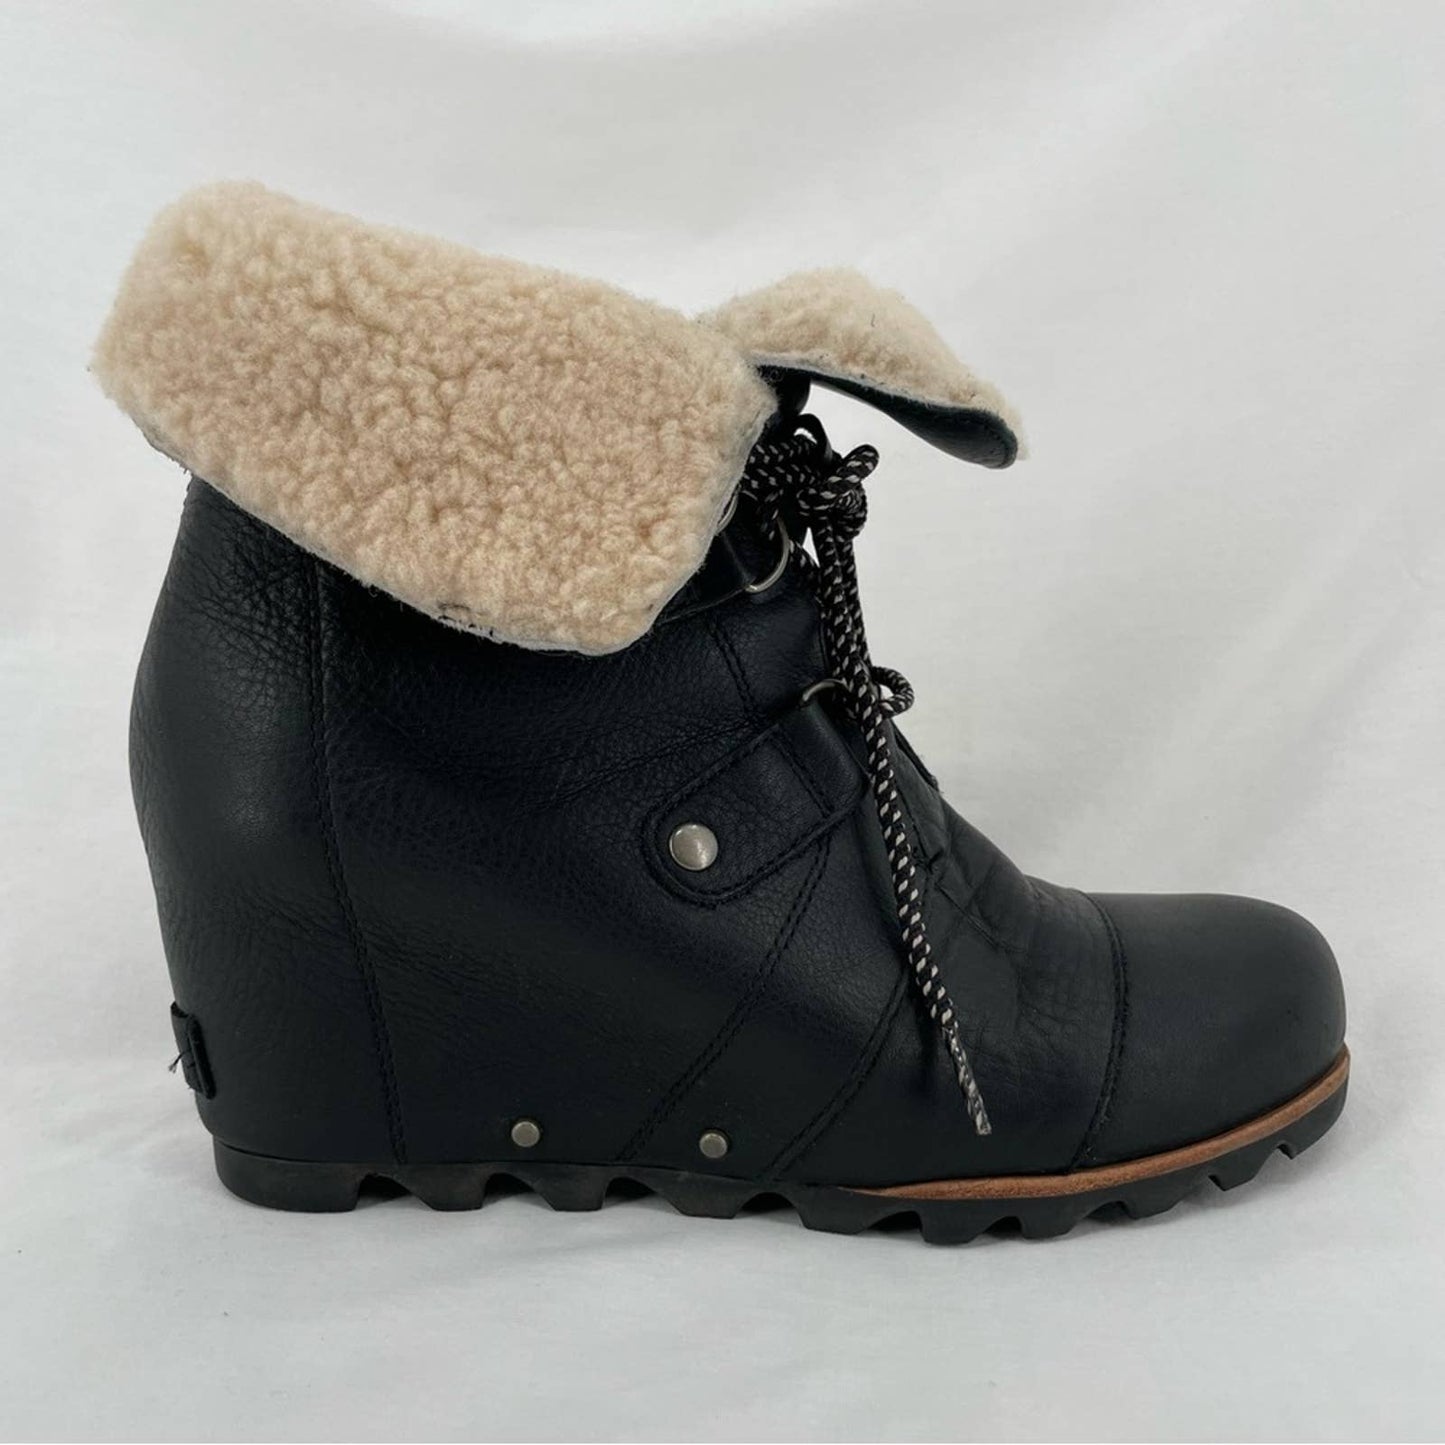 Sorel Black Joan of Arctic Wedge Real Shearling Trim Leather Mid Style Boots Size 9.5